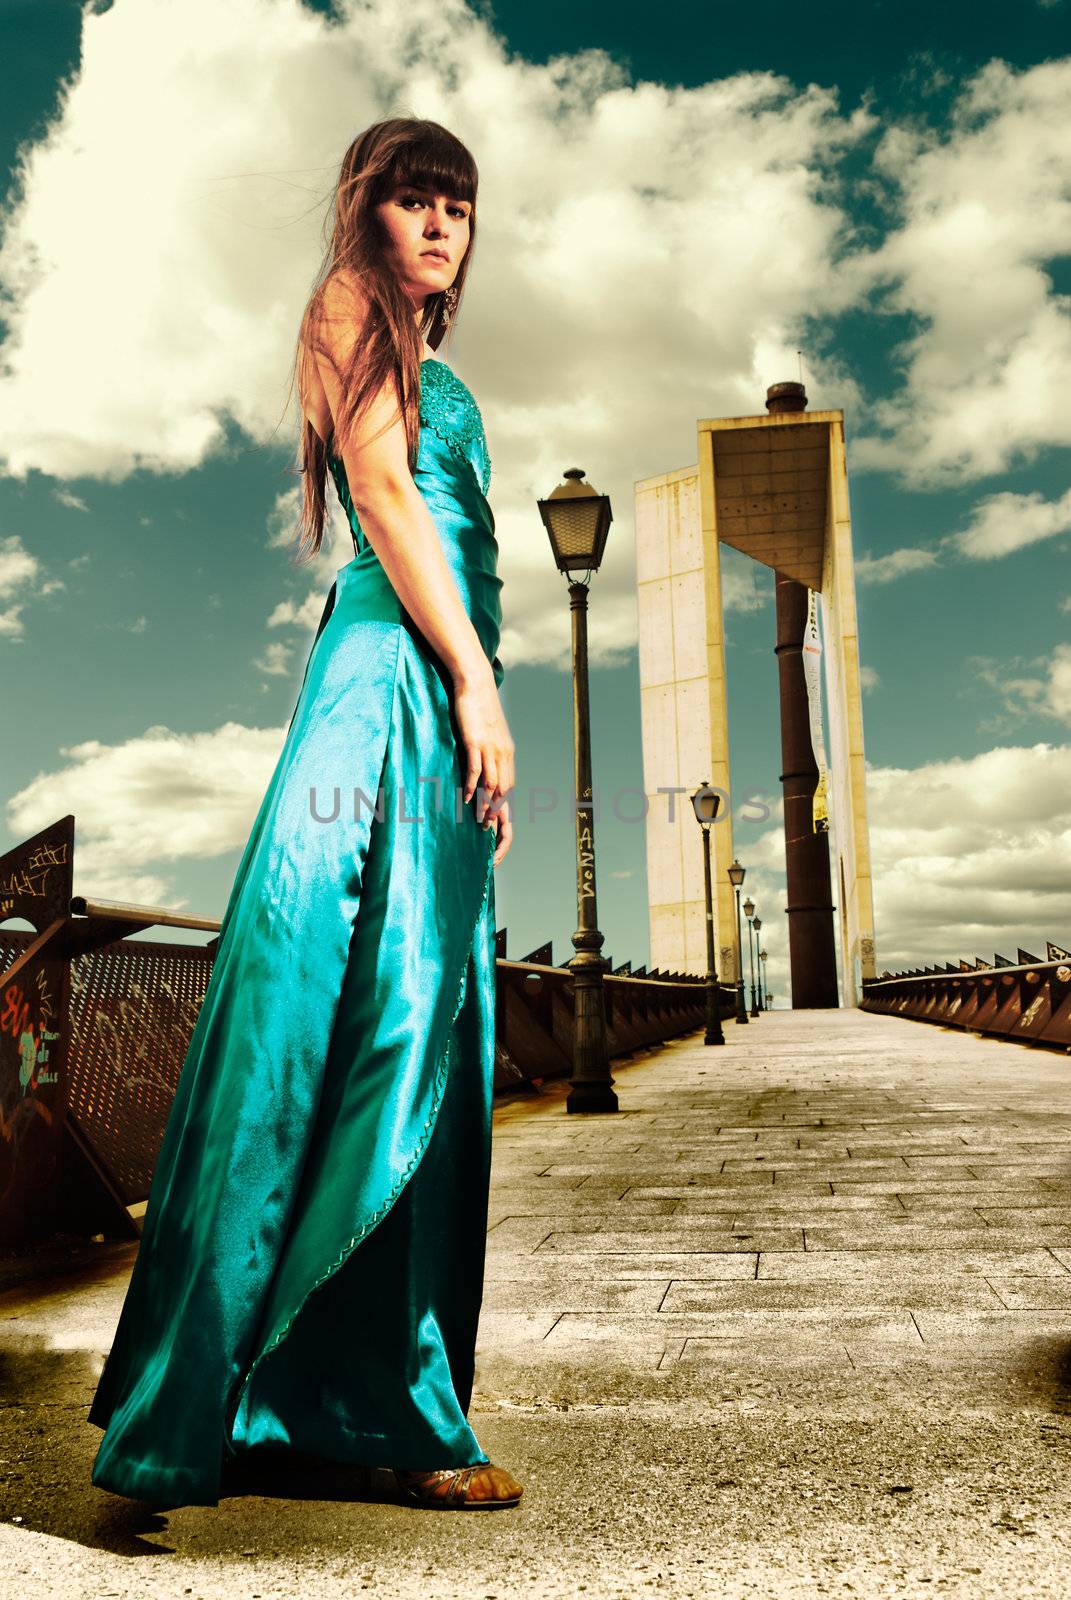 Young woman fashion outdoor cross processing dress urban scene by dgmata